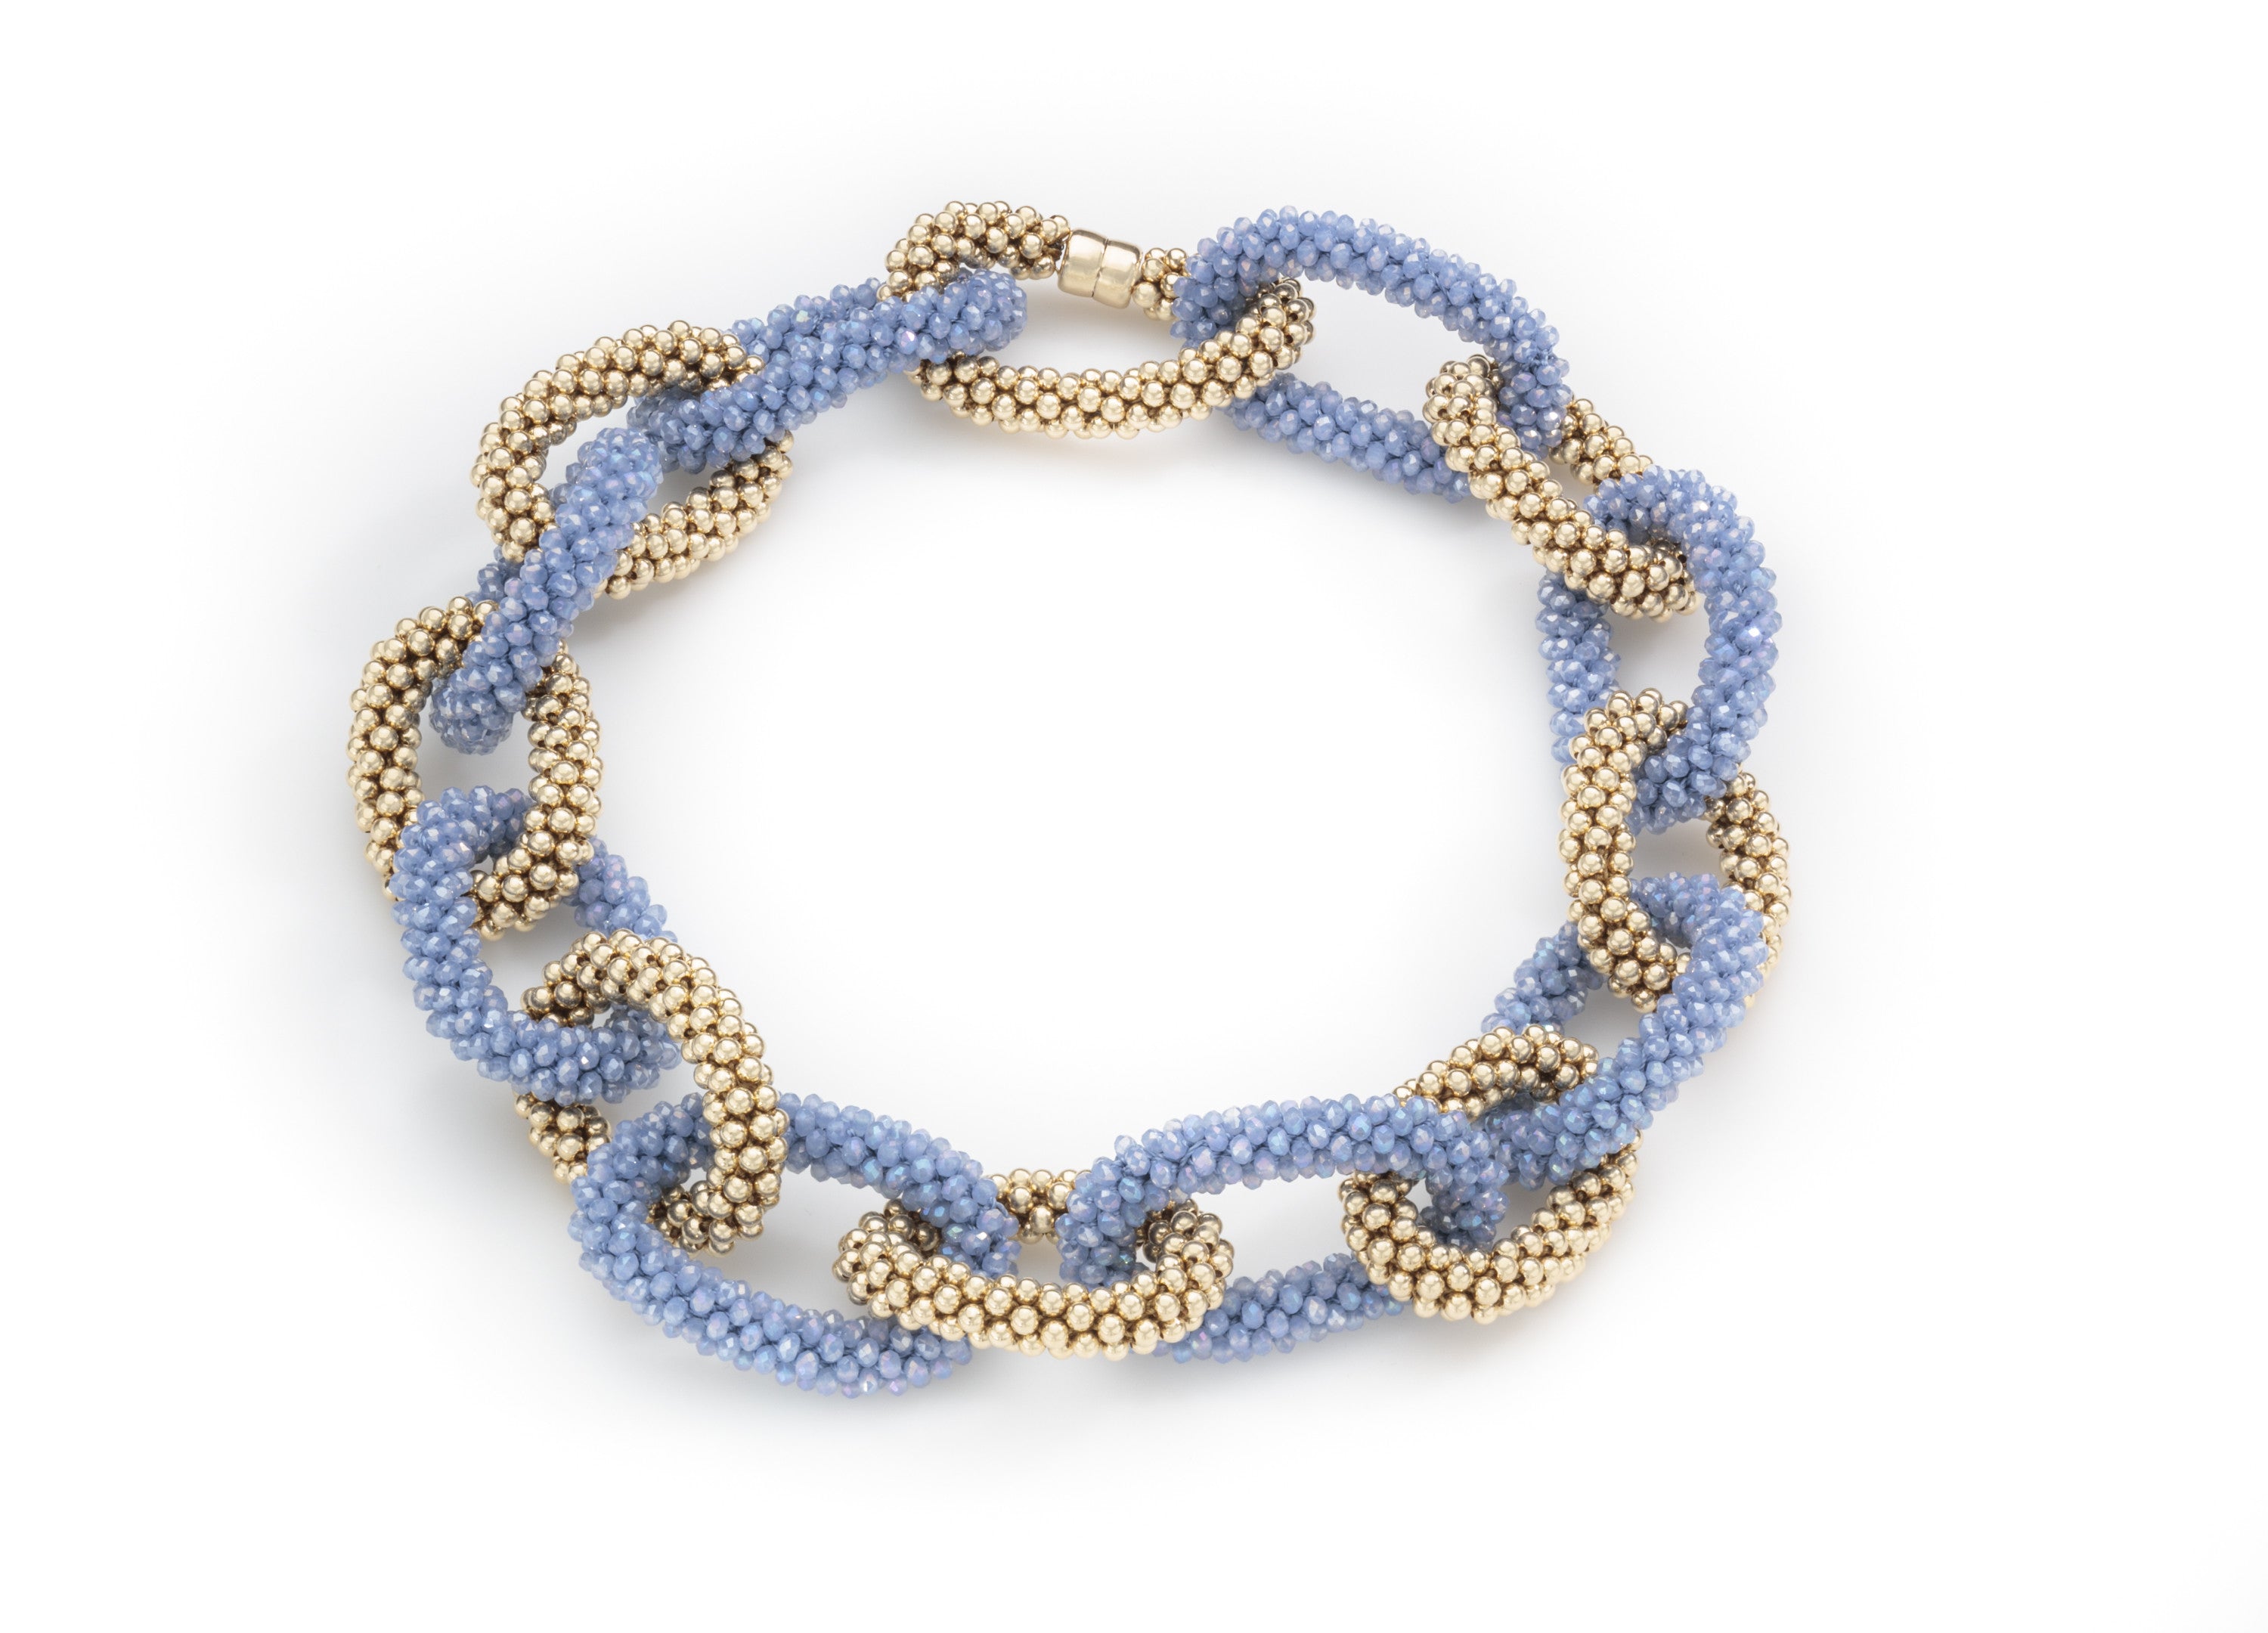 A Powder Blue Crystal and Gold Linkable Necklace